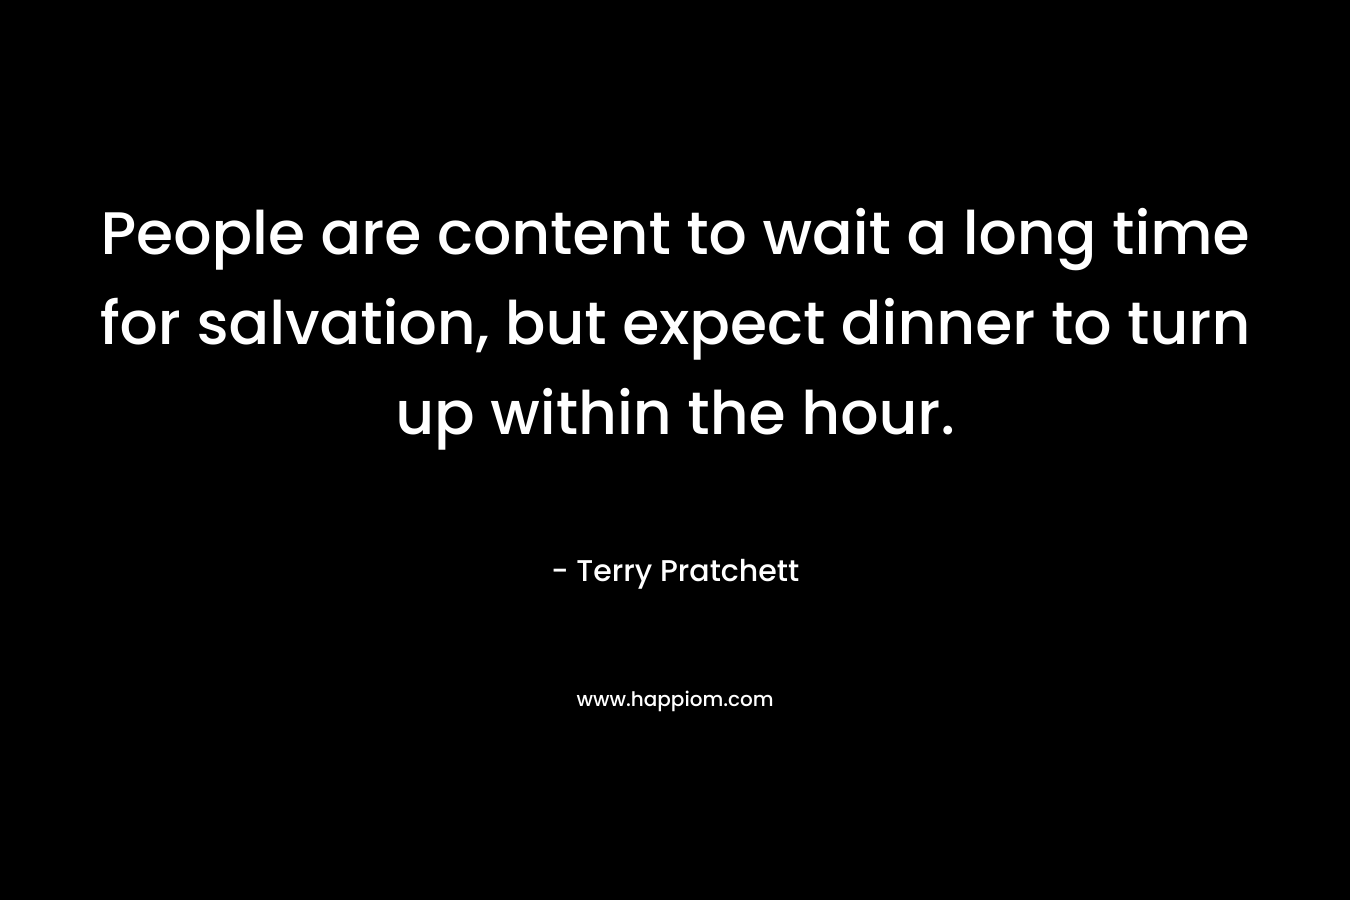 People are content to wait a long time for salvation, but expect dinner to turn up within the hour. – Terry Pratchett